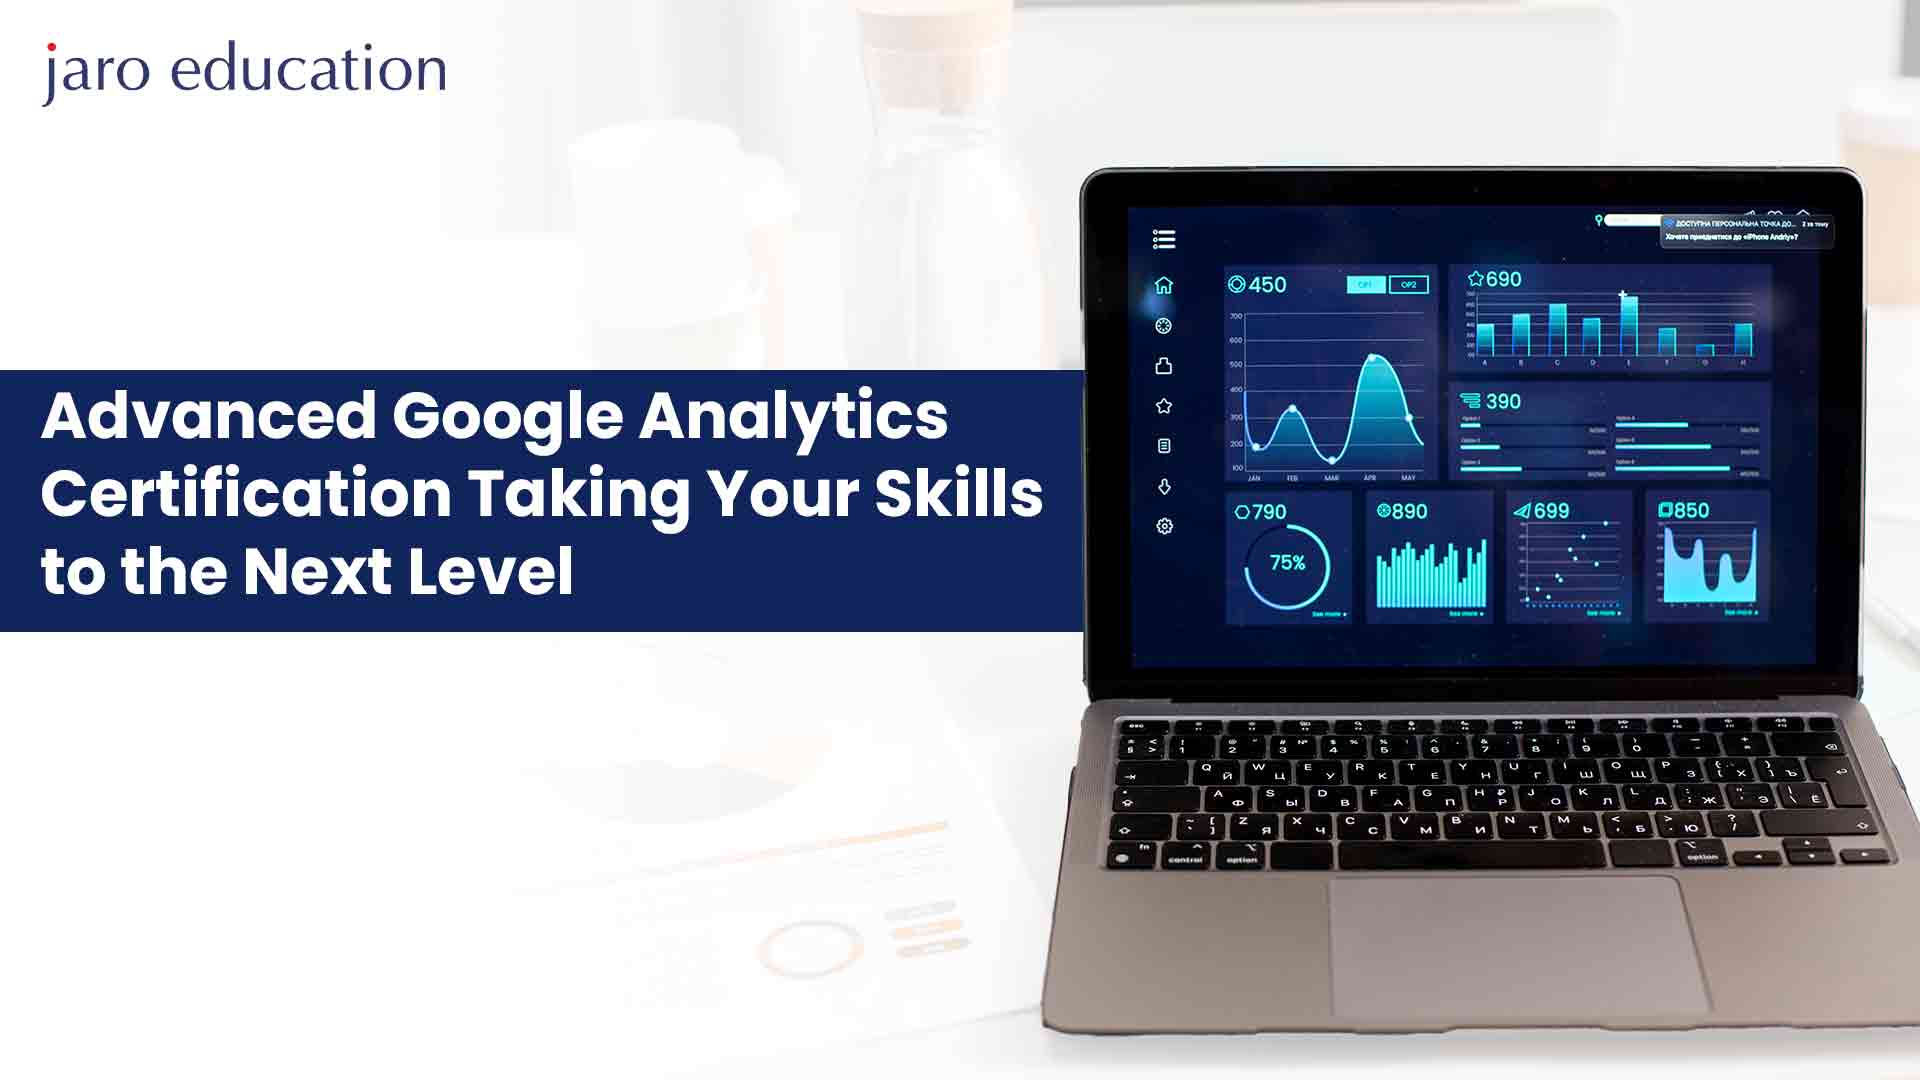 Advanced Google Analytics Certification Taking Your Skills to the Next Level